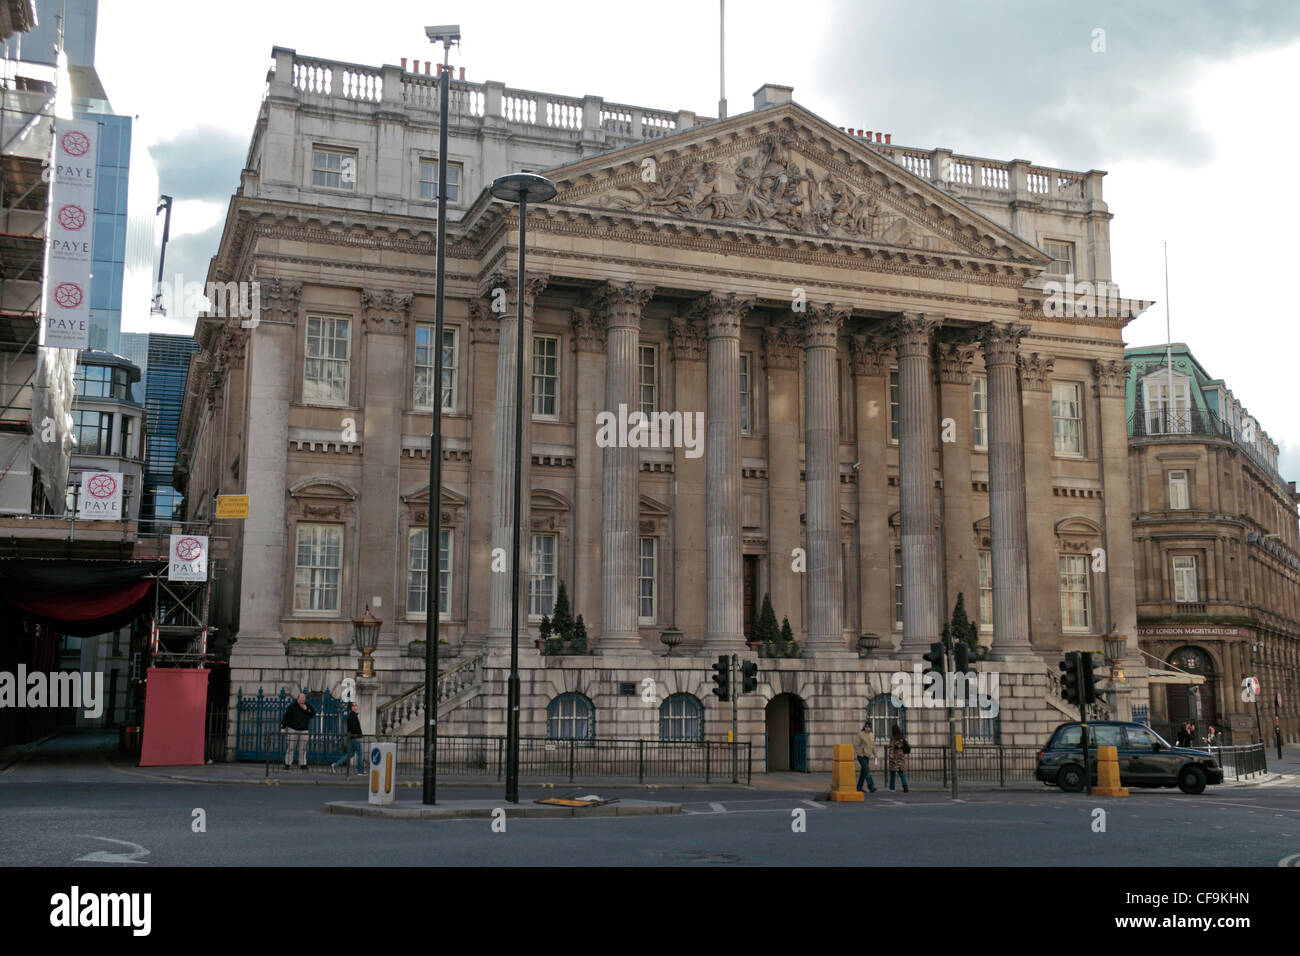 The Mansion House, close to the spot of the original Stocks Market building in the City of London, England. Stock Photo